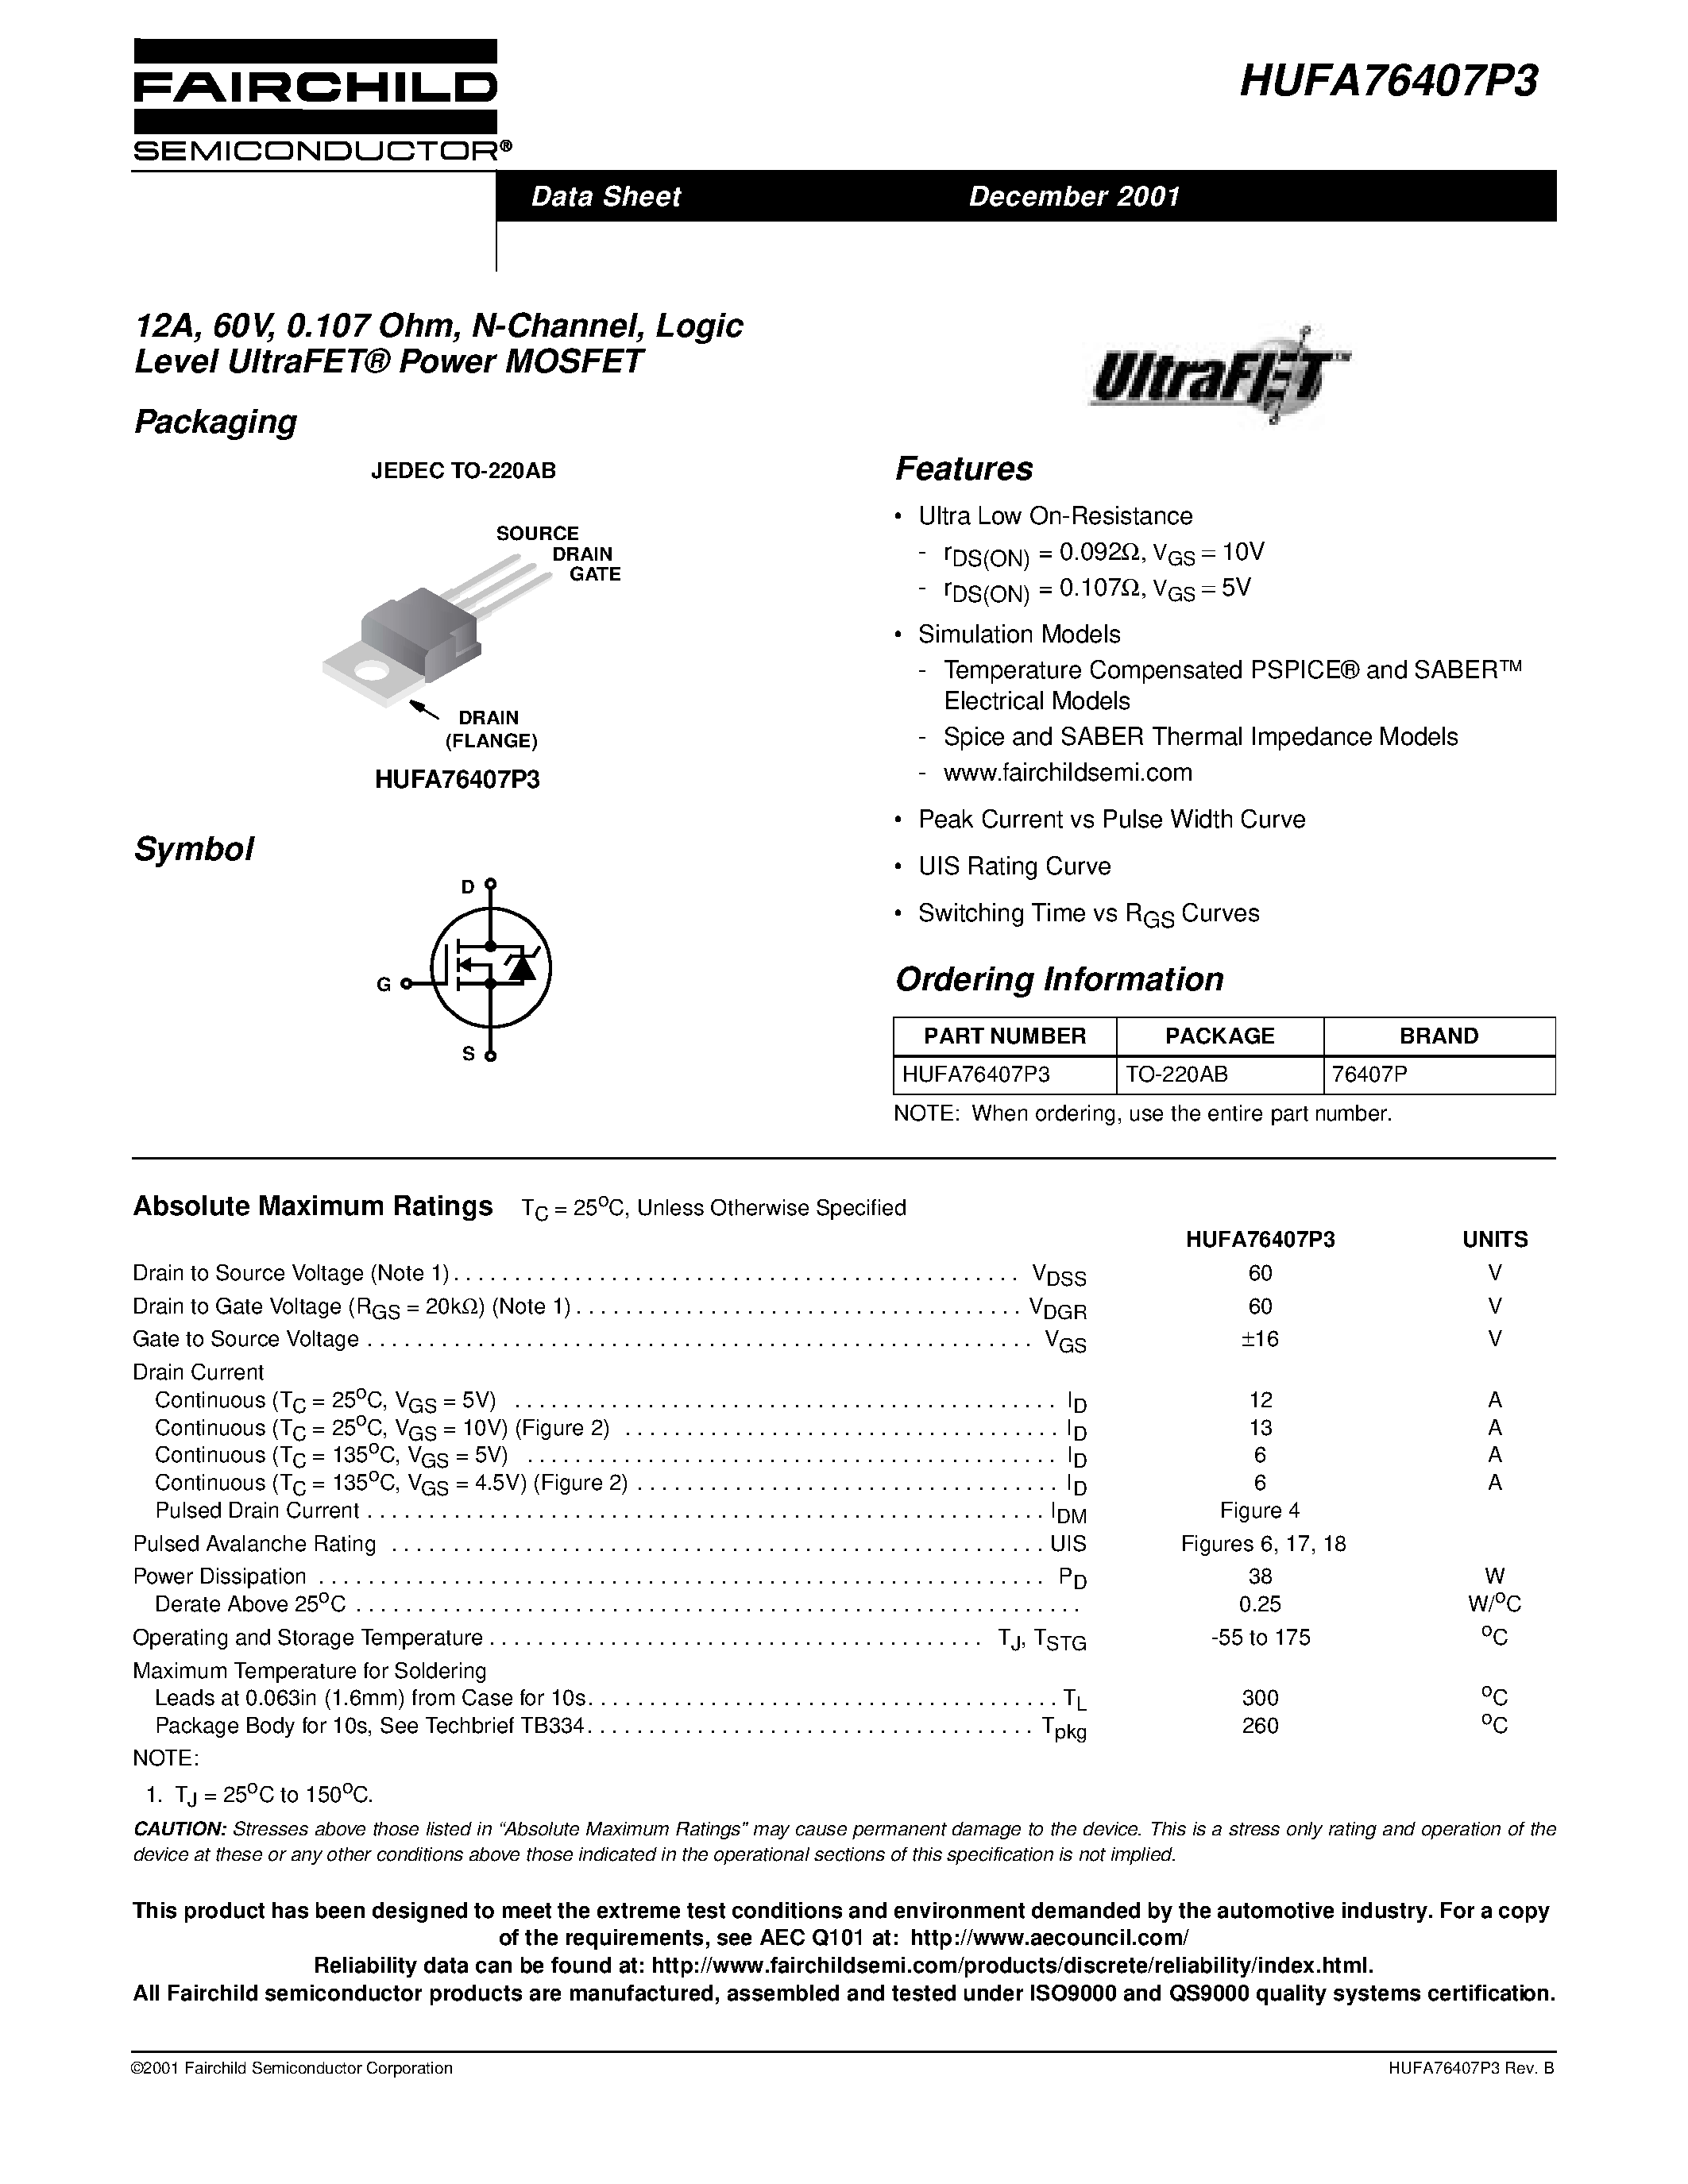 Datasheet HUFA76407P3 - 12A/ 60V/ 0.107 Ohm/ N-Channel/ Logic Level UltraFET Power MOSFET page 1